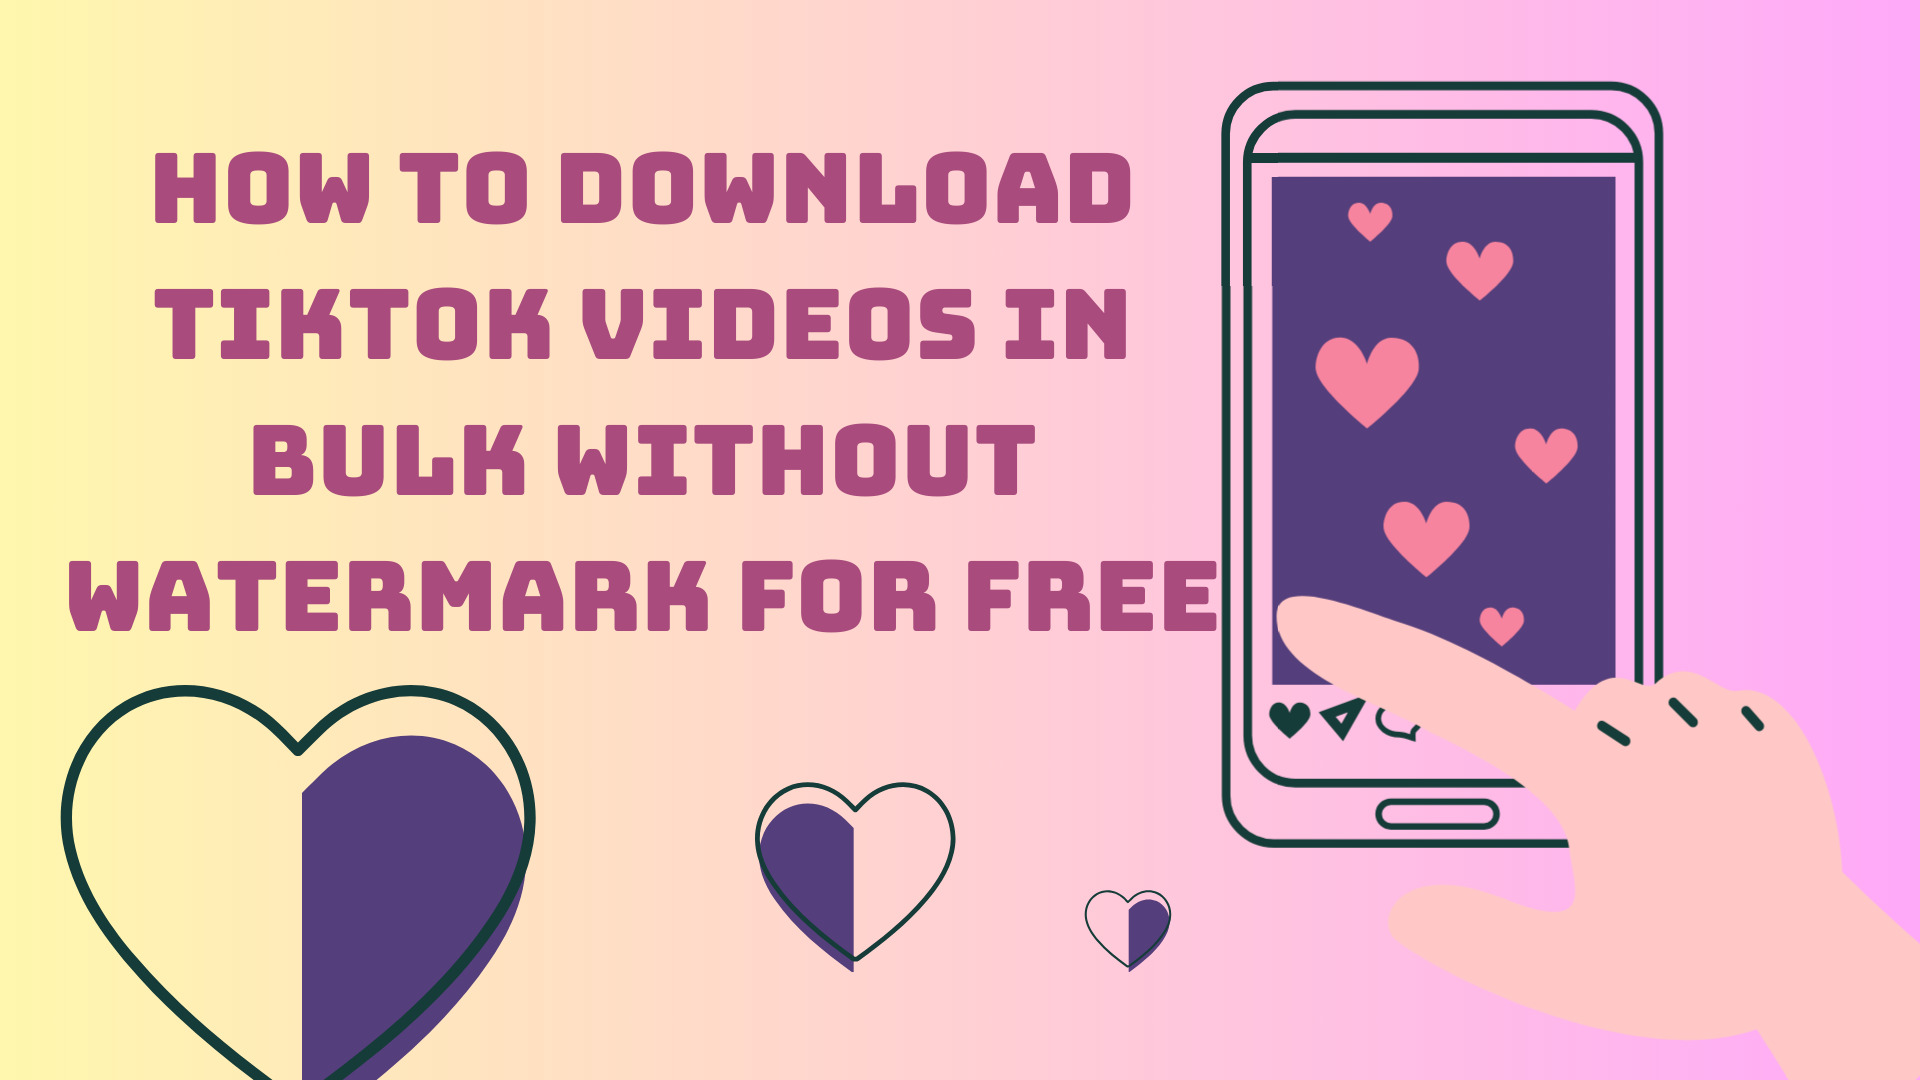 How to Download TikTok Videos in Bulk Without Watermark for Free